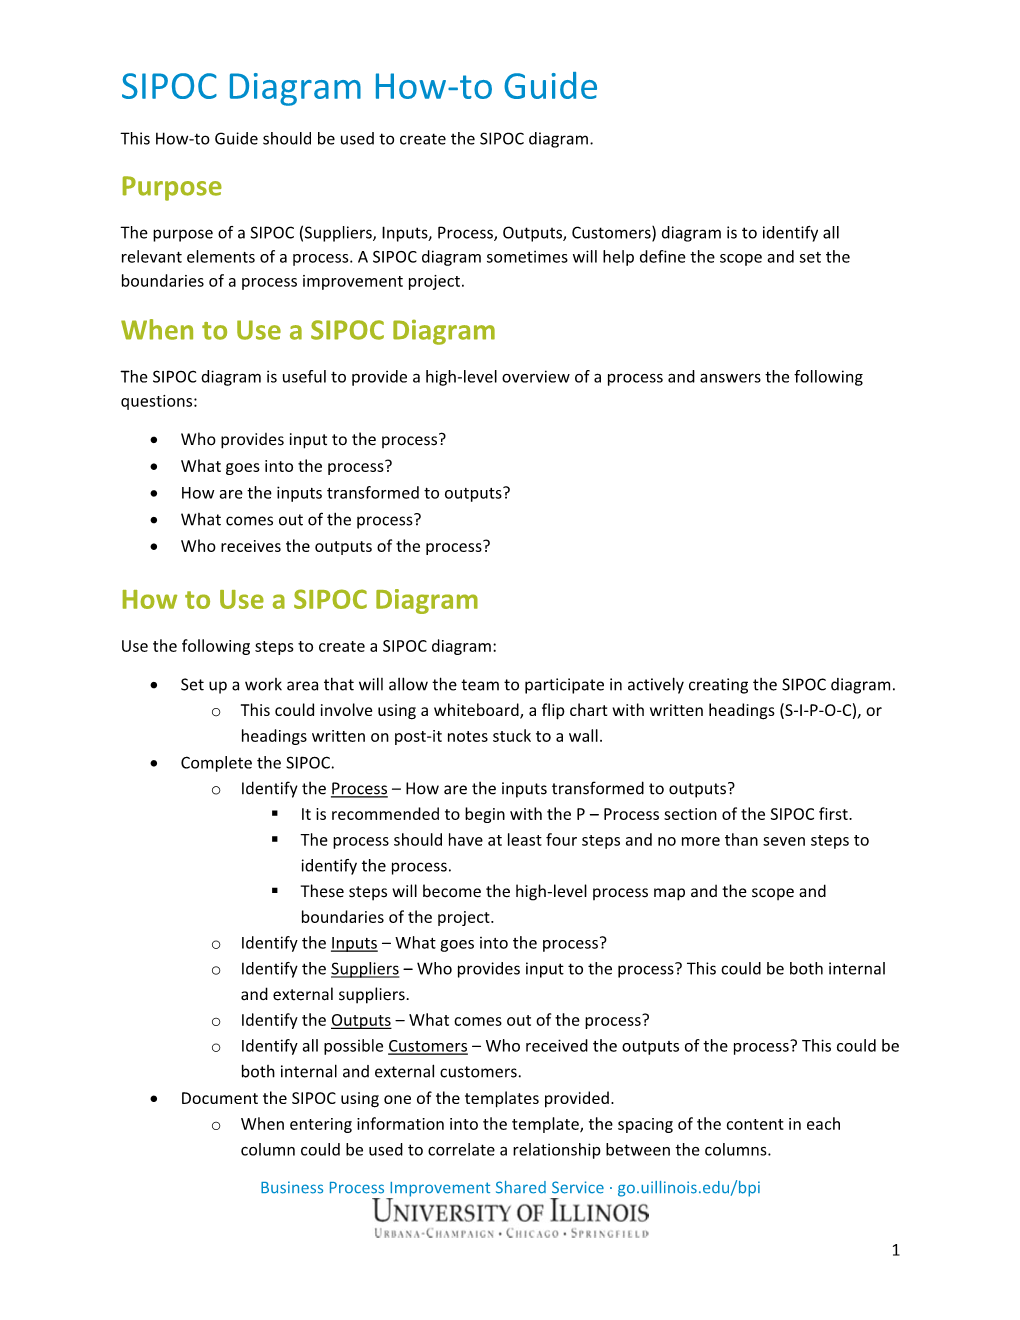 SIPOC Diagram How-To Guide